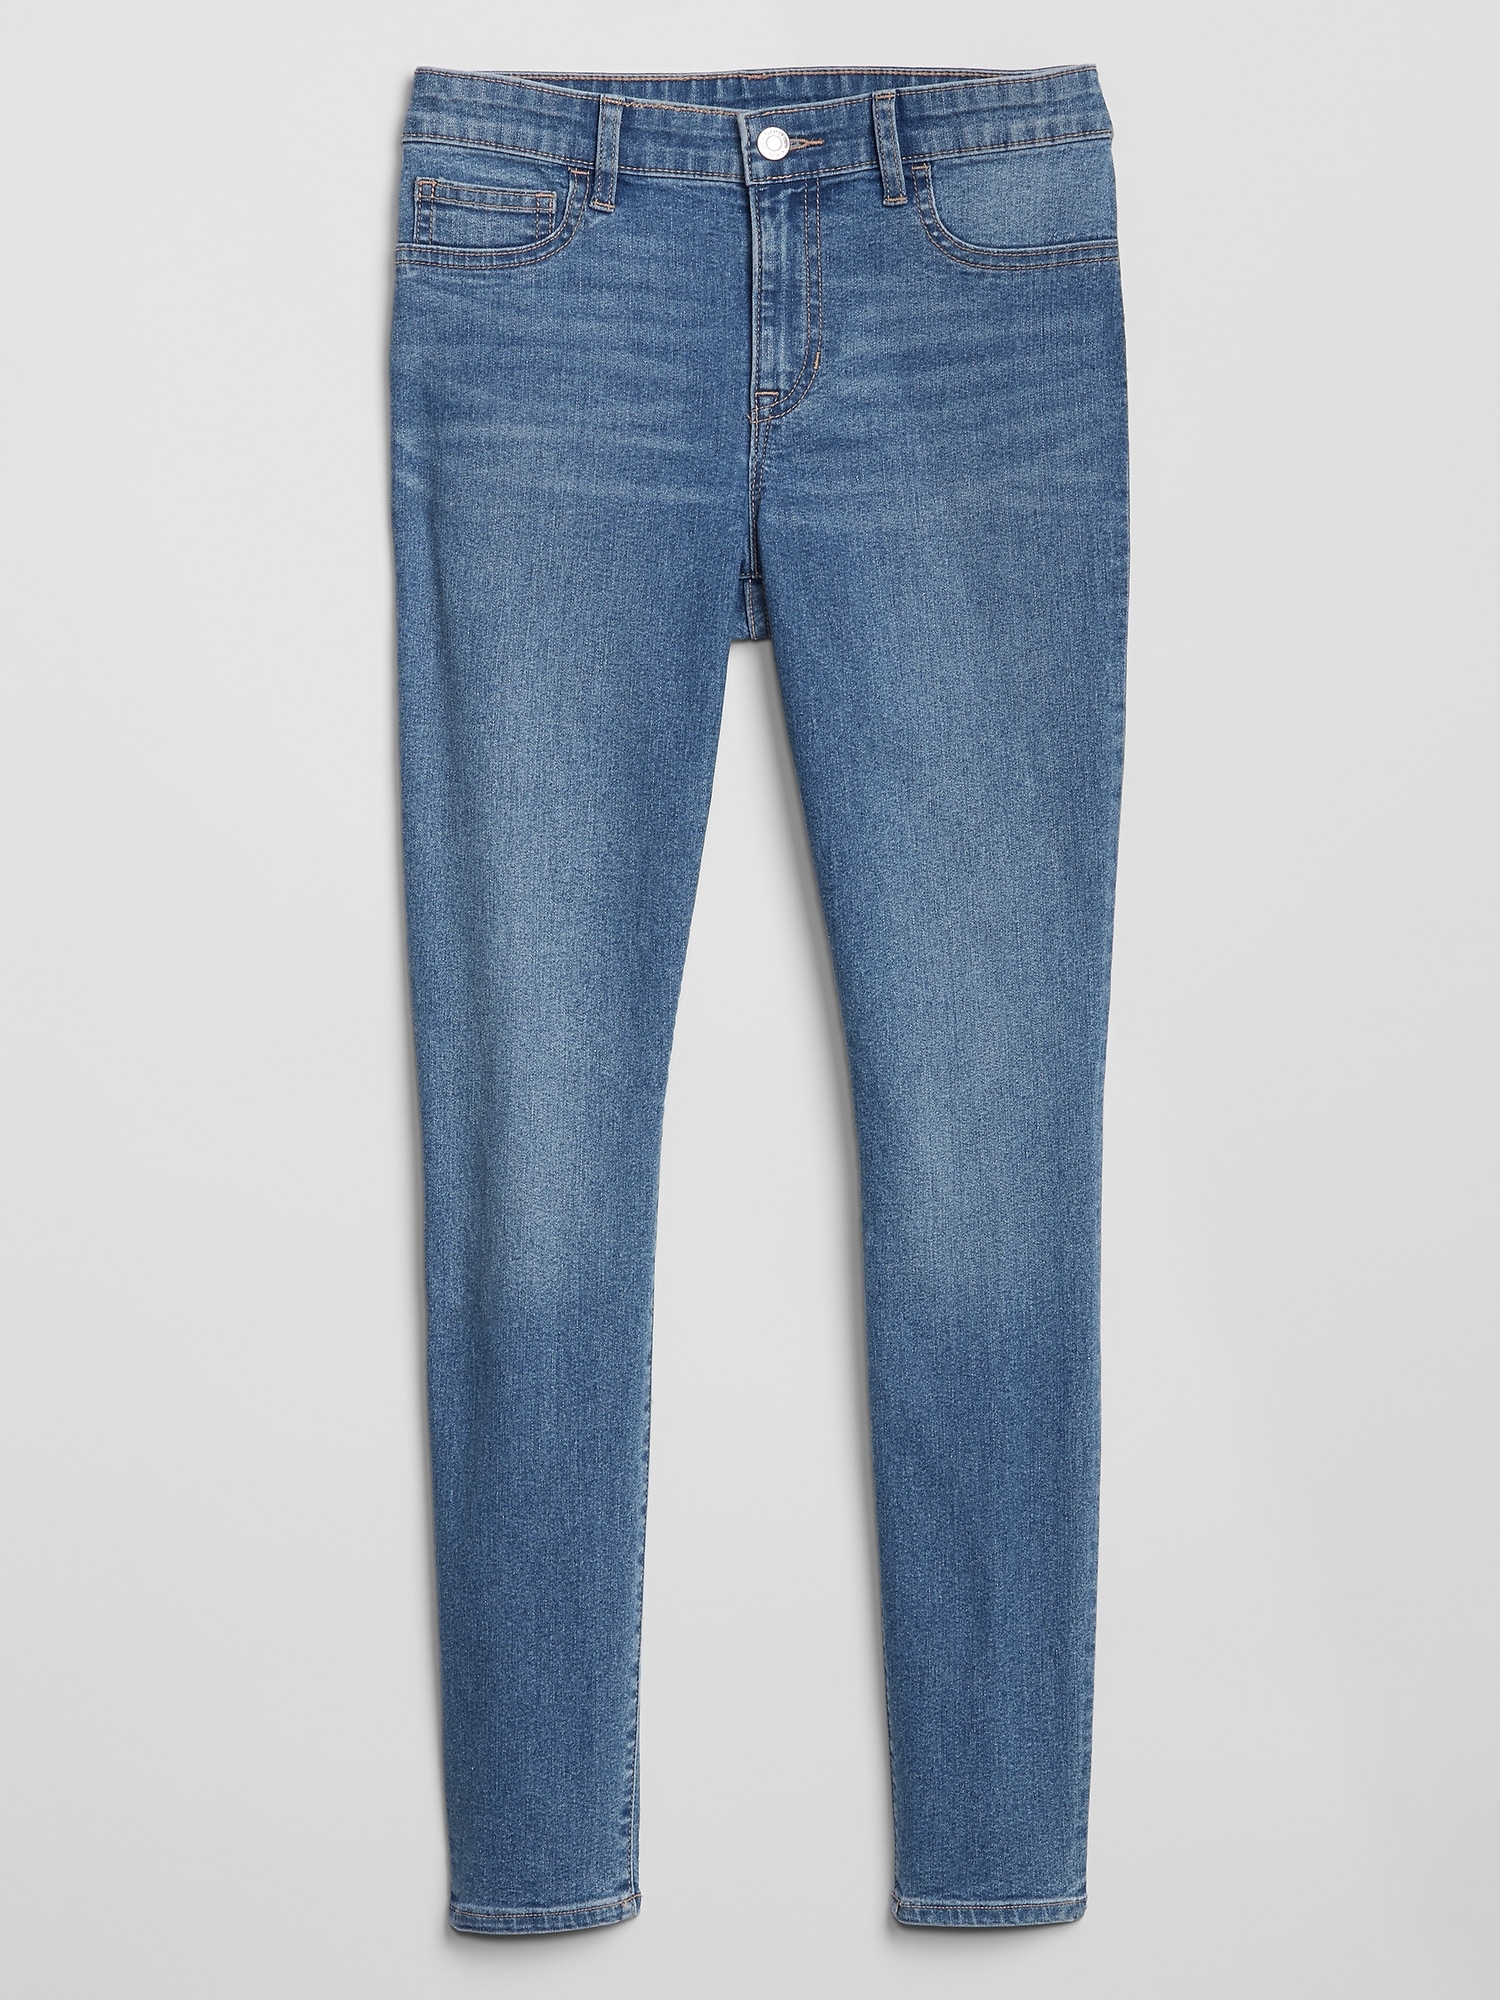 Buy Friends Like These Mid Blue High Waisted Jeggings from Next Australia